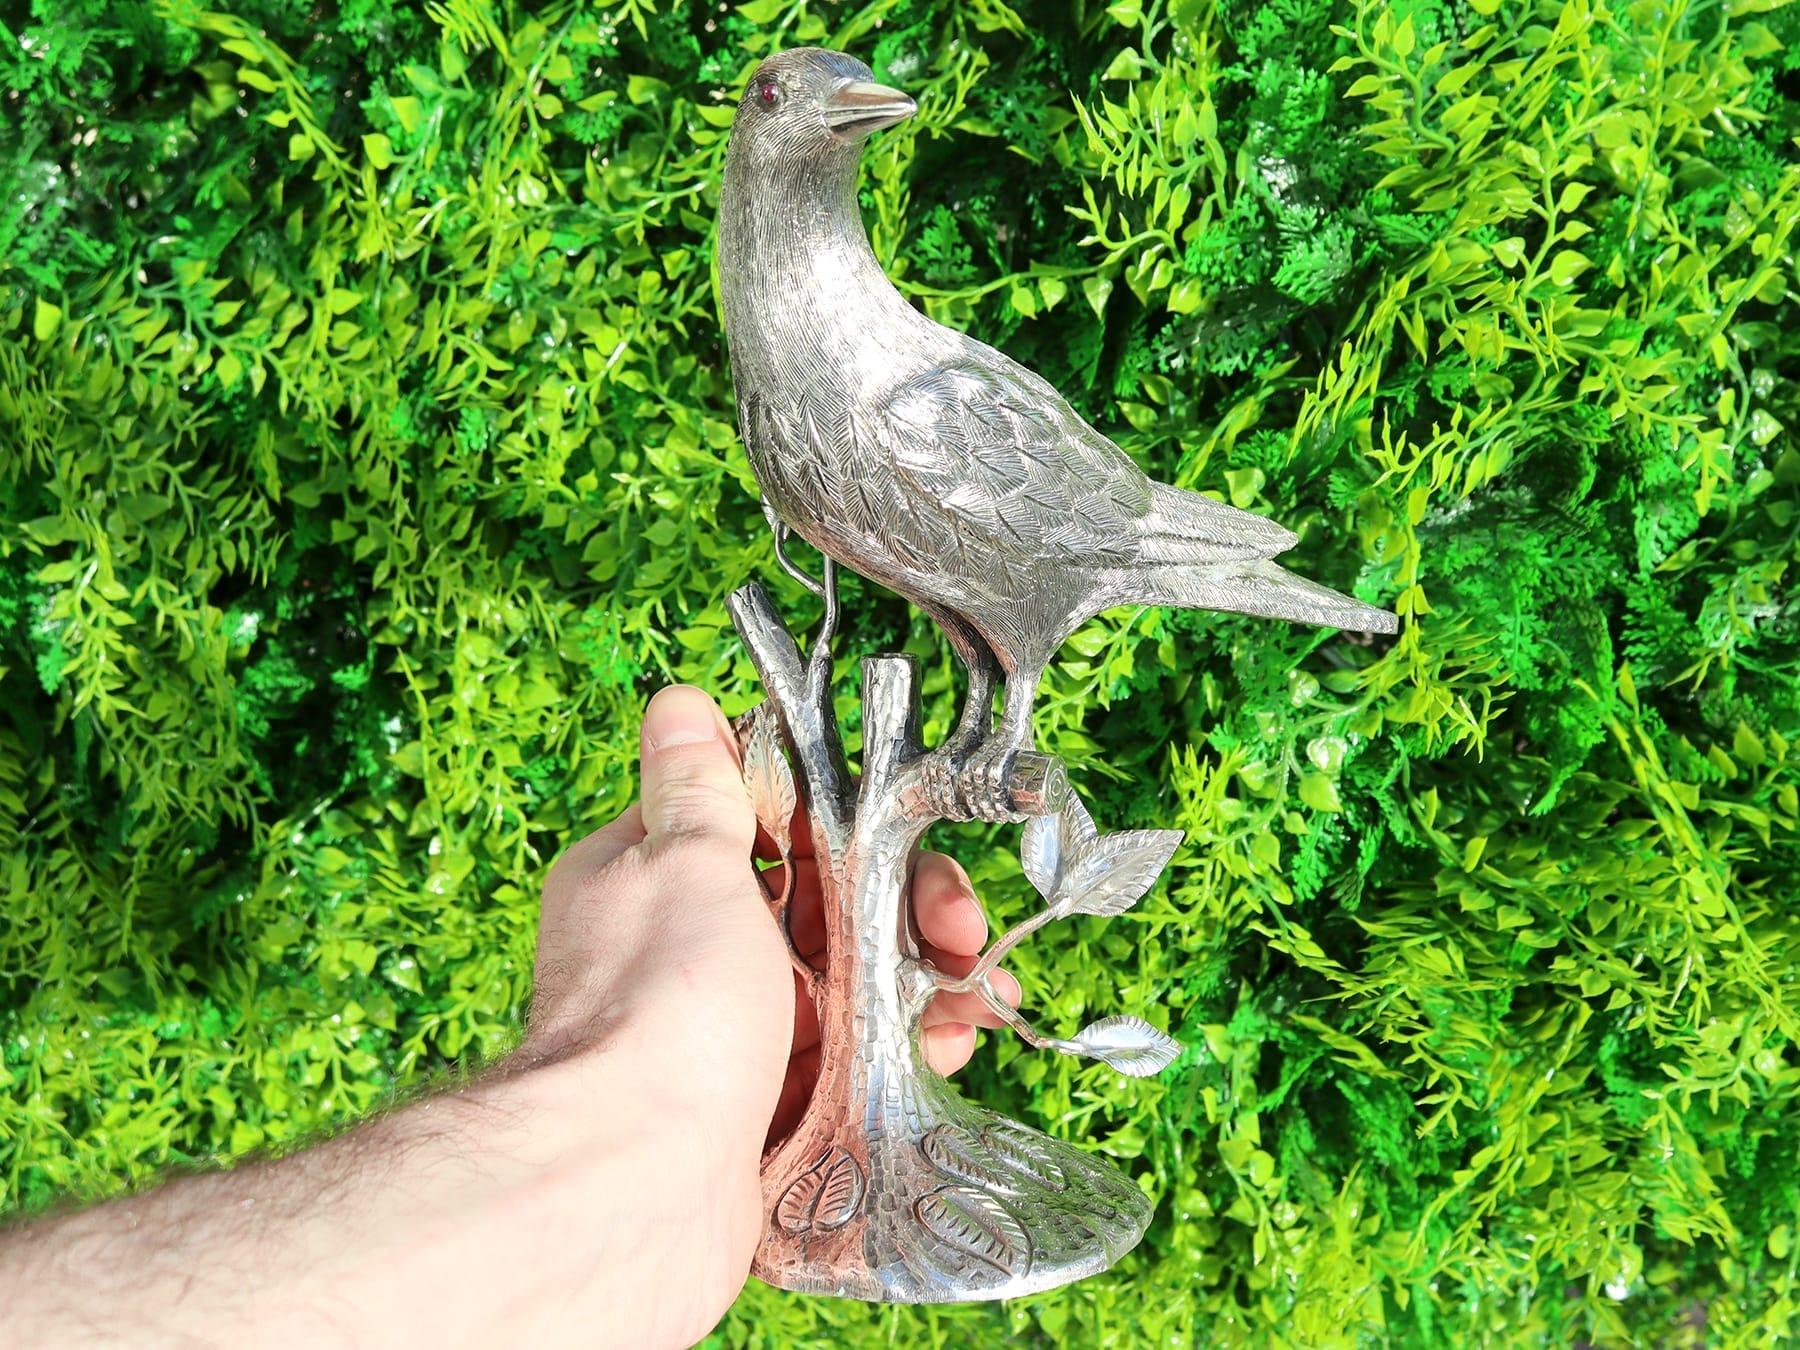 An exceptional, fine and impressive antique Mexican sterling silver bird model; an addition to our animal related silverware collection.

This exceptional vintage Mexican cast sterling silver table ornament has been realistically modelled in the